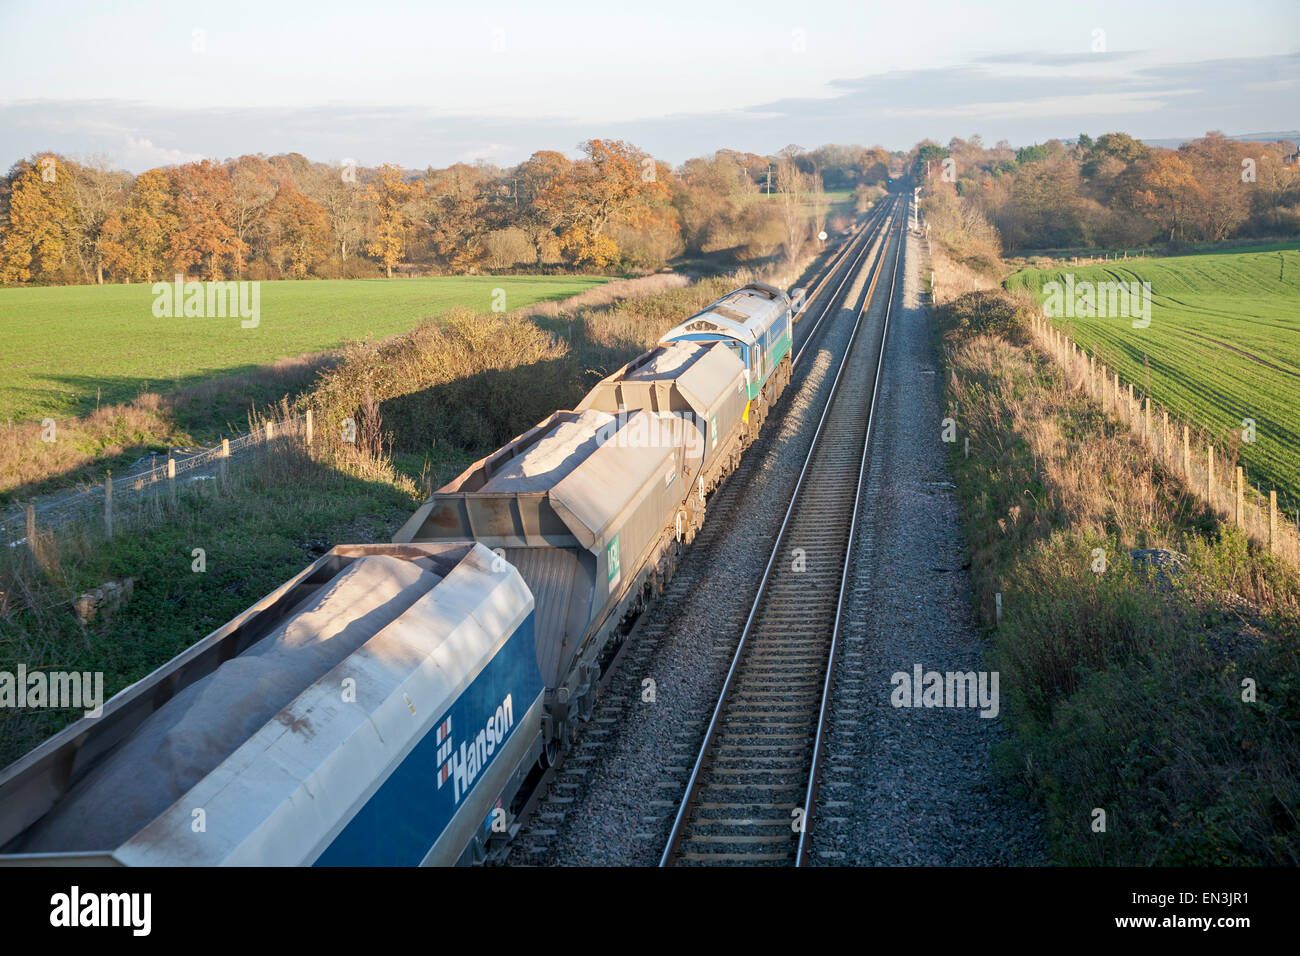 Open wagons of freight train on the West Coast mainline at Woodborough, Wiltshire, England, UK Stock Photo